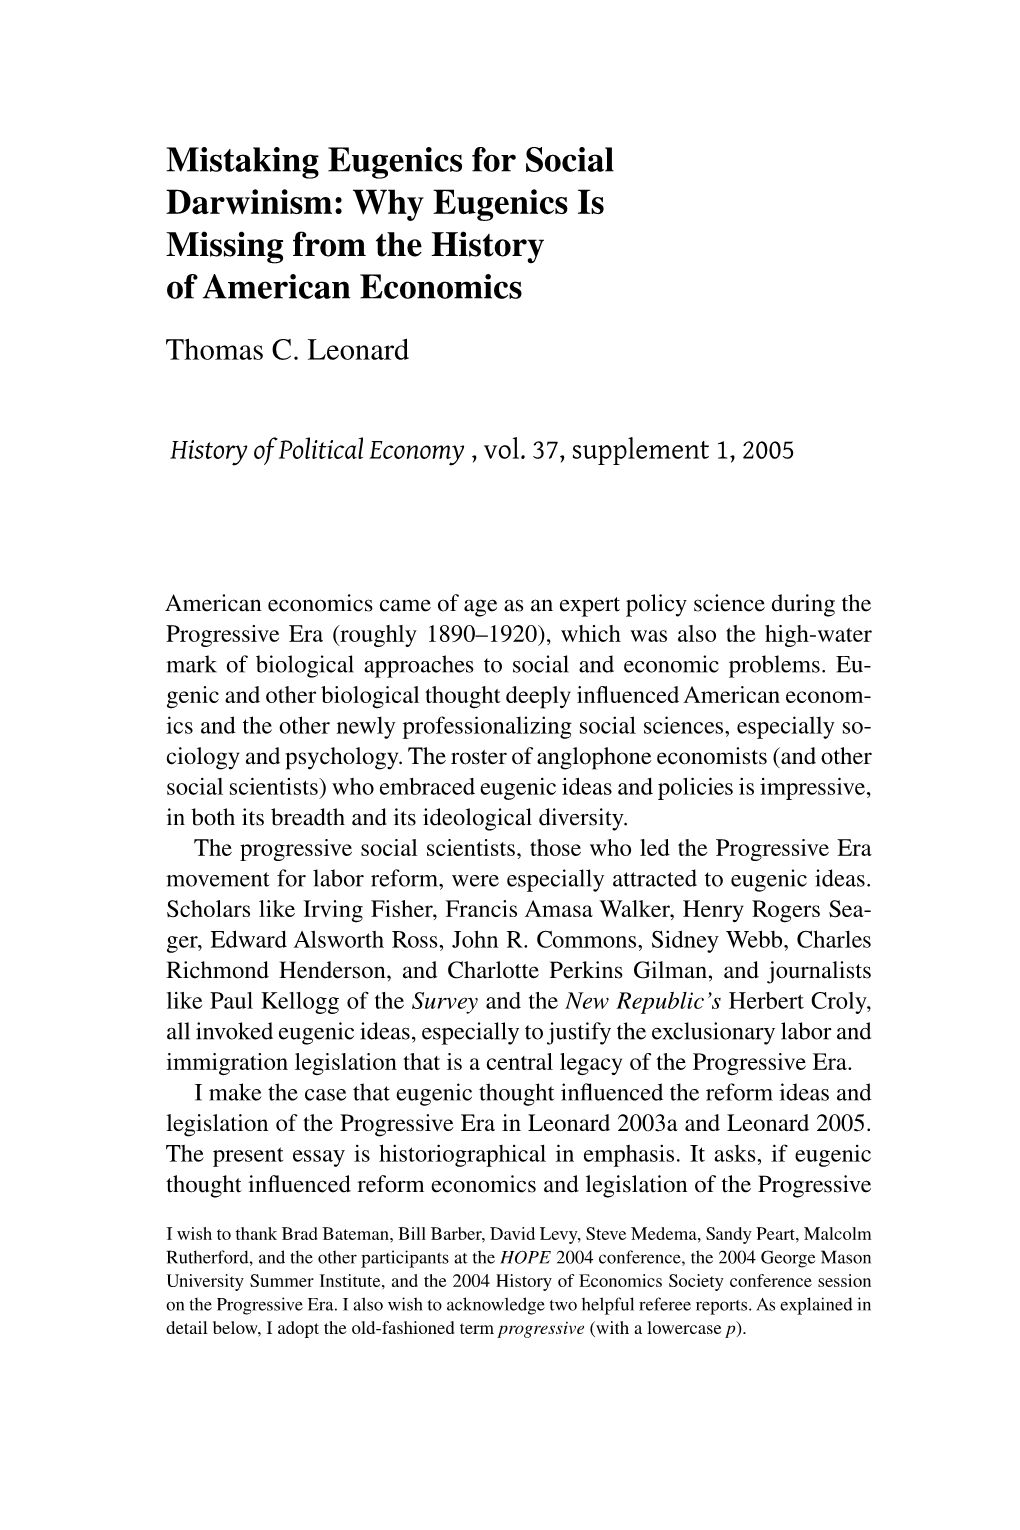 Why Eugenics Is Missing from the History of American Economics Thomas C